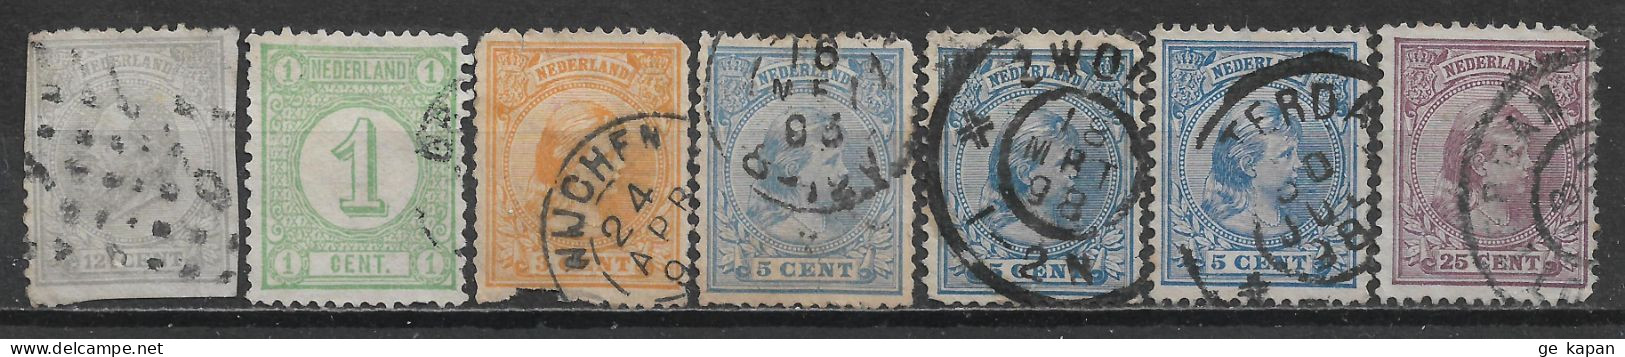 1875-1894 NETHERLANDS Set Of 7 Used Stamps (Michel # 22D,31aD,34a,35ab,35b,42b) CV €11.10 - Gebraucht